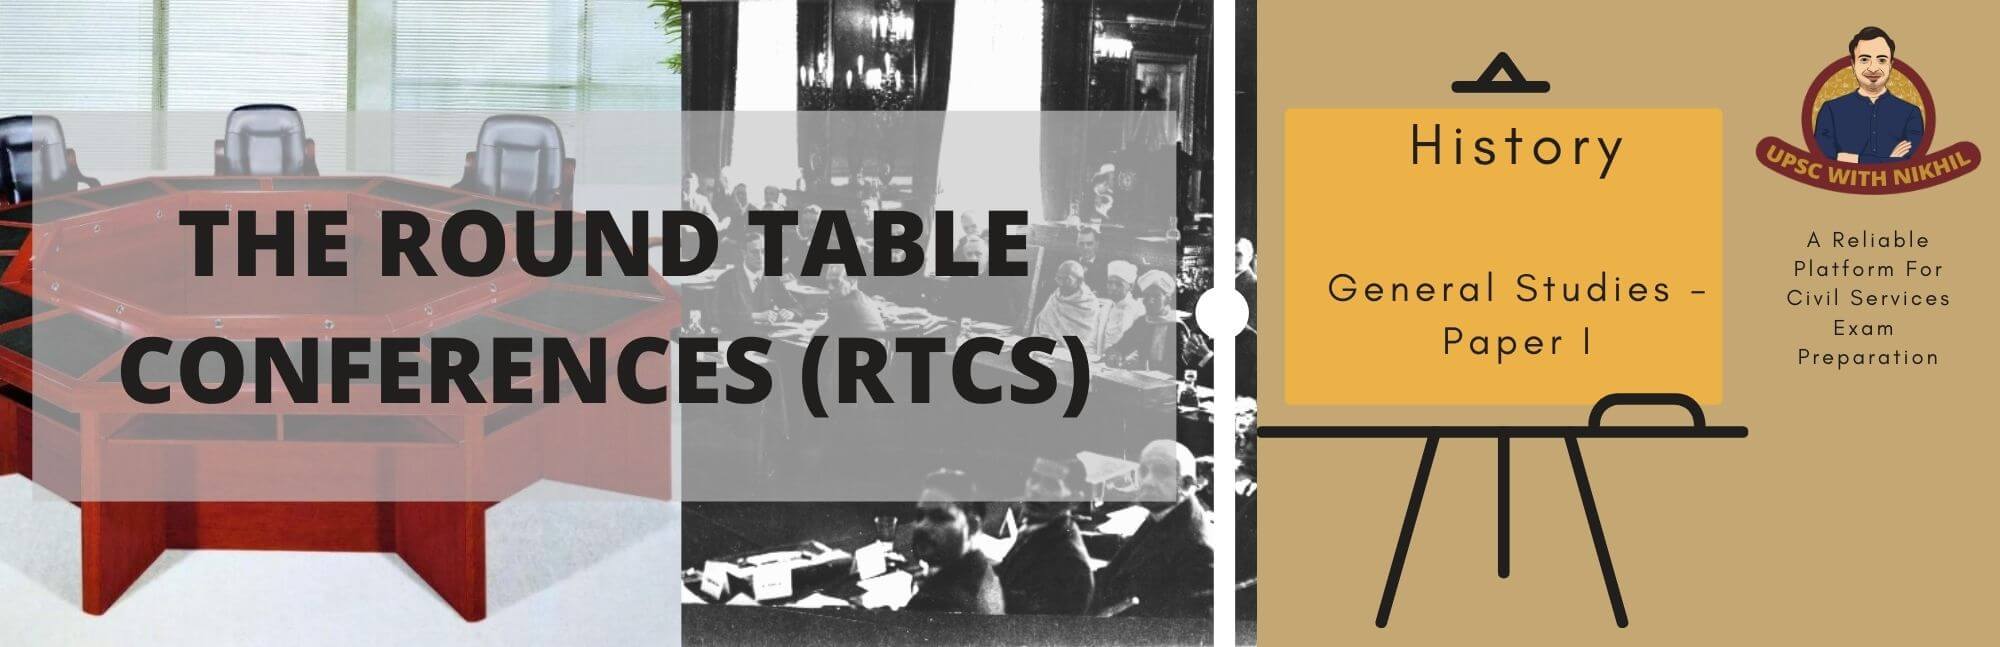 The Round Table Conferences Rtcs, Why Were The Three Round Table Conferences Held Between 1930 And 1932